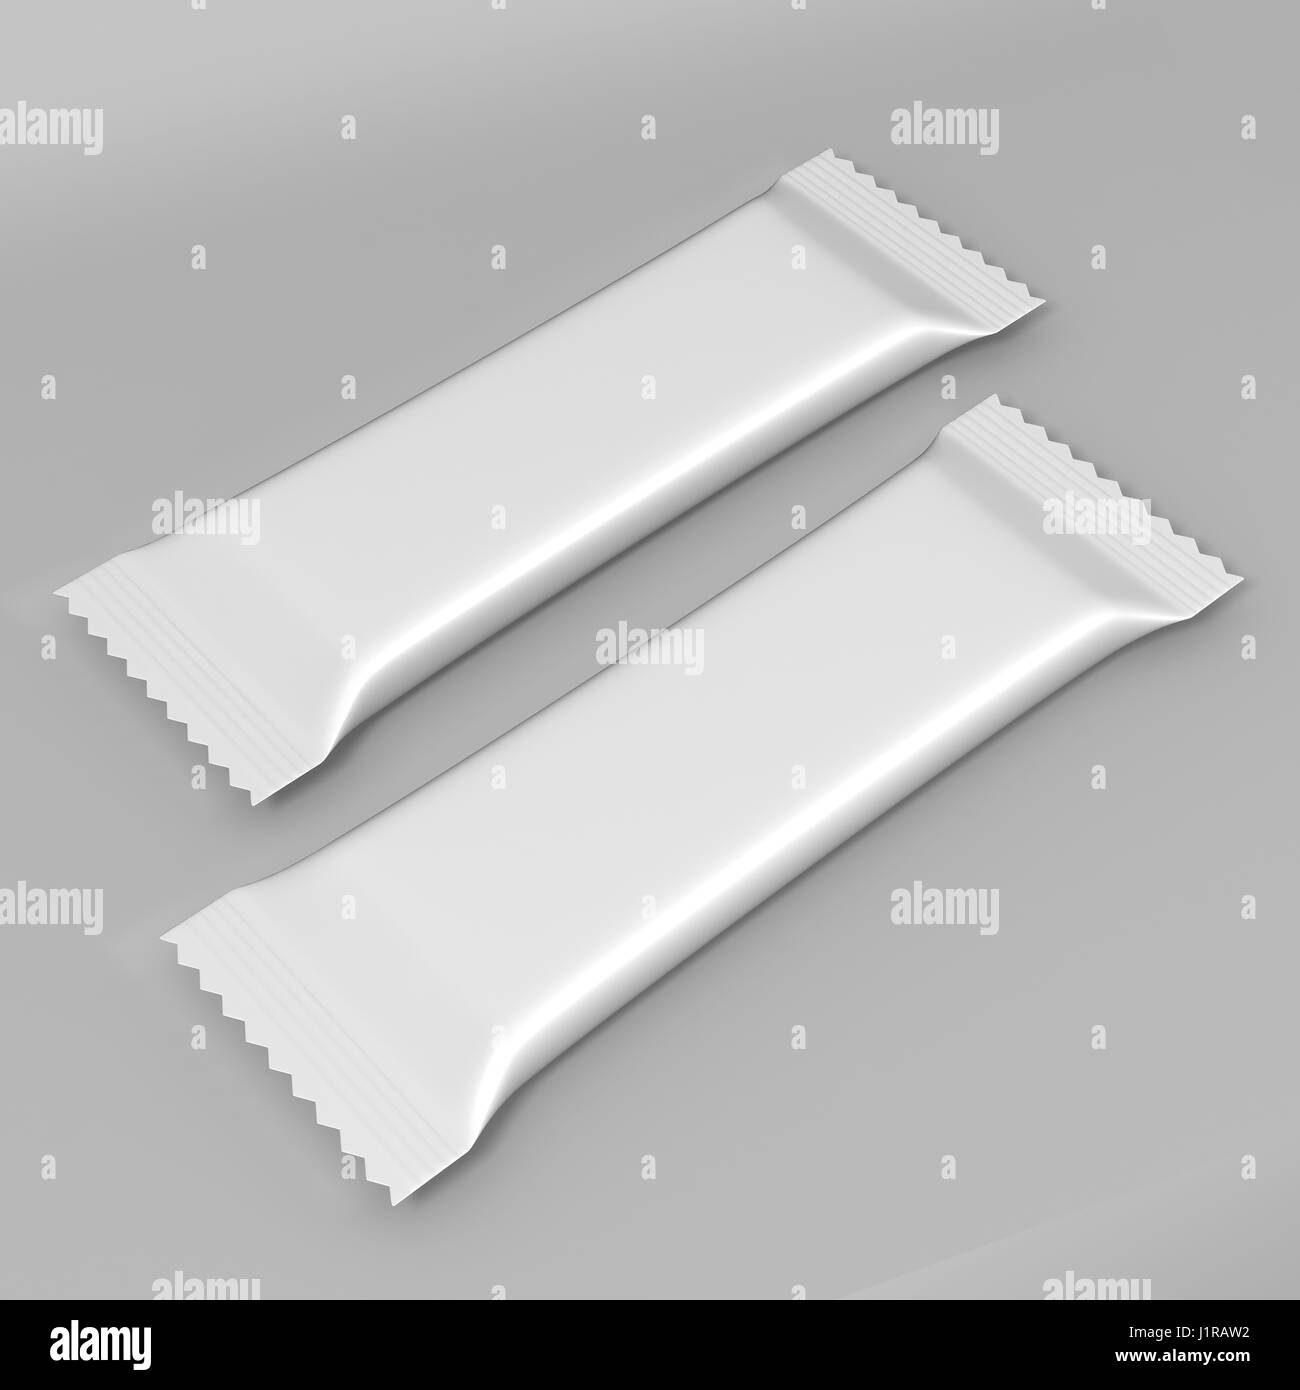 Download Chocolate Wrapper Packaging Stick Sachet Mock up 3D illustration Stock Photo: 138811038 - Alamy